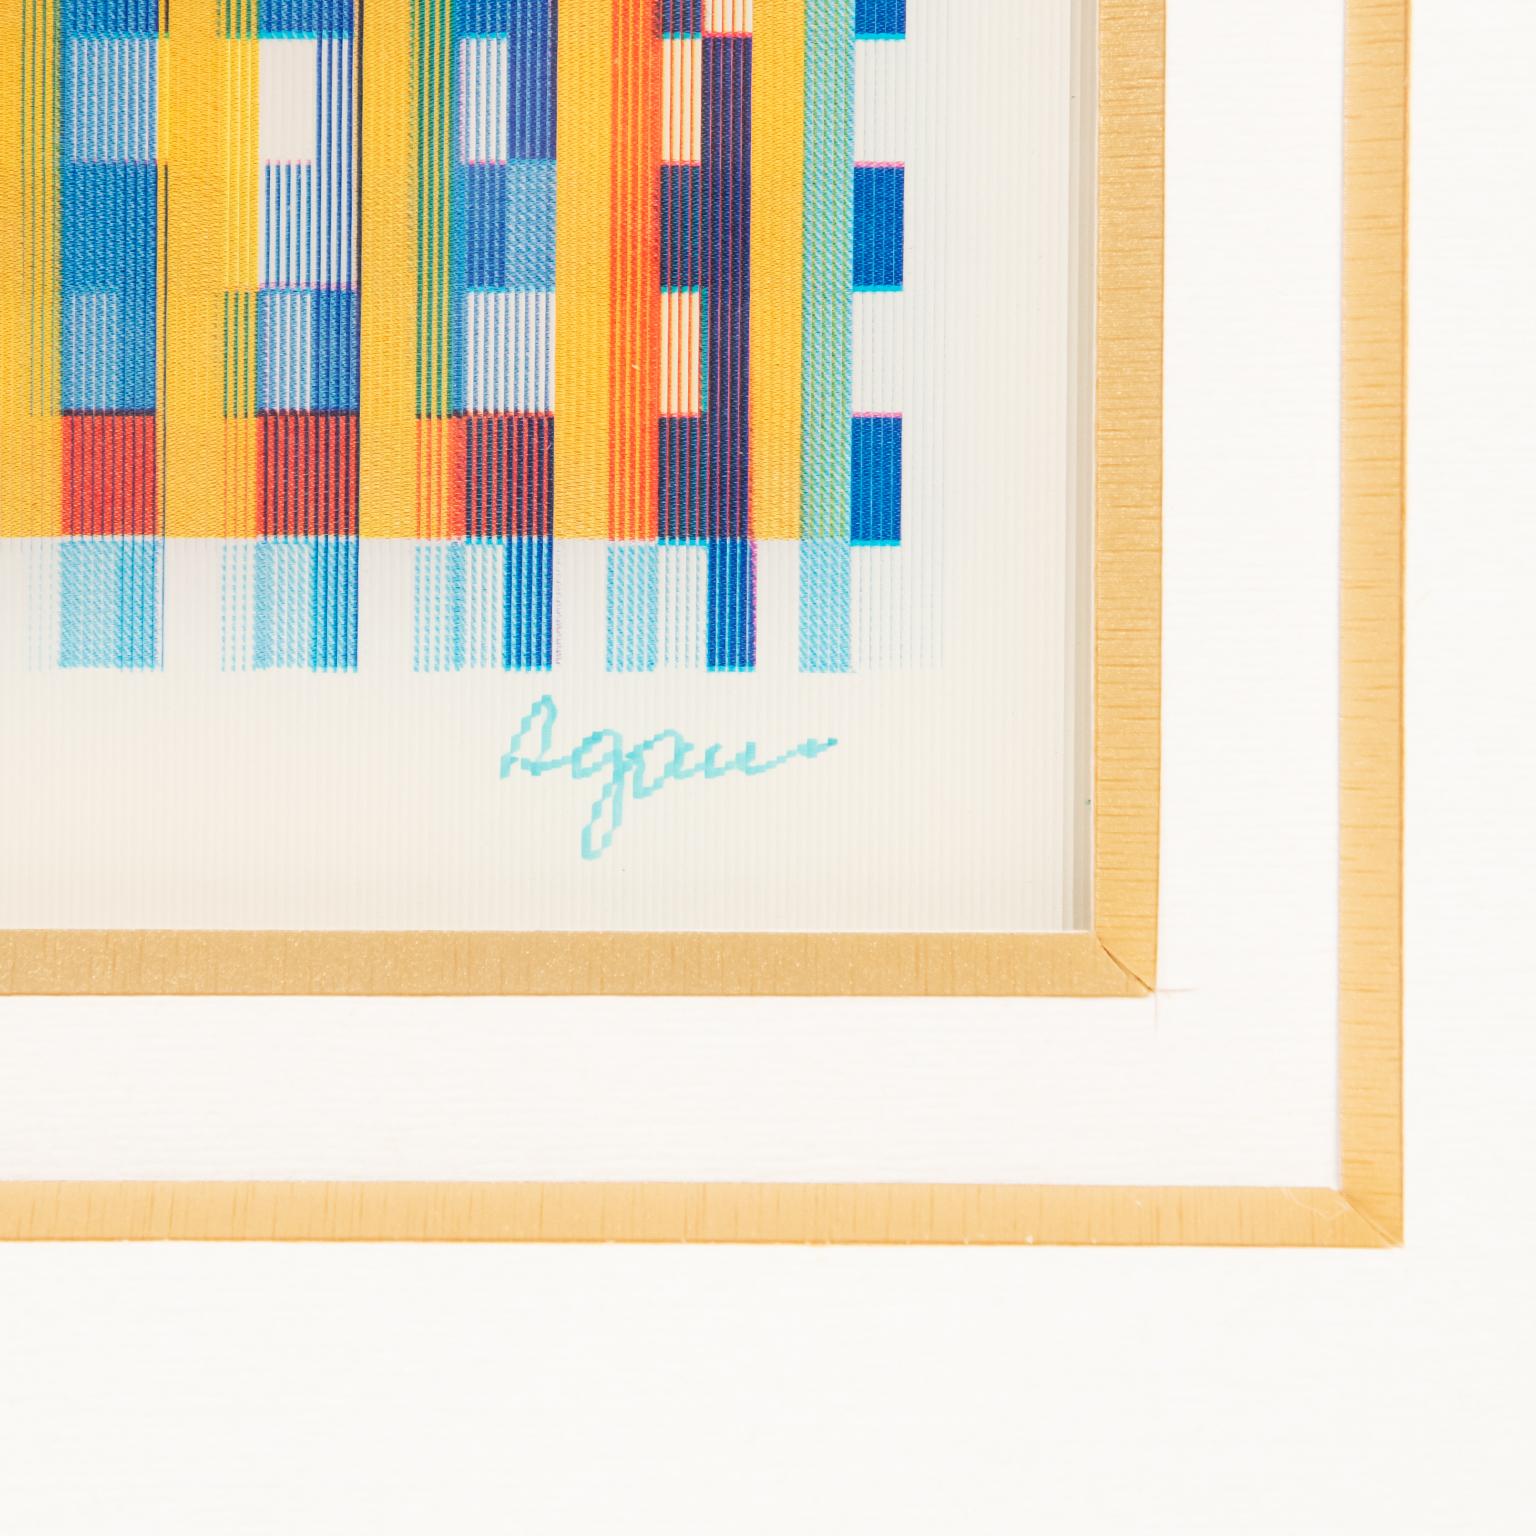 Late 20th Century Signed and Numbered Lenticular Agamograph by Yaacov Agam